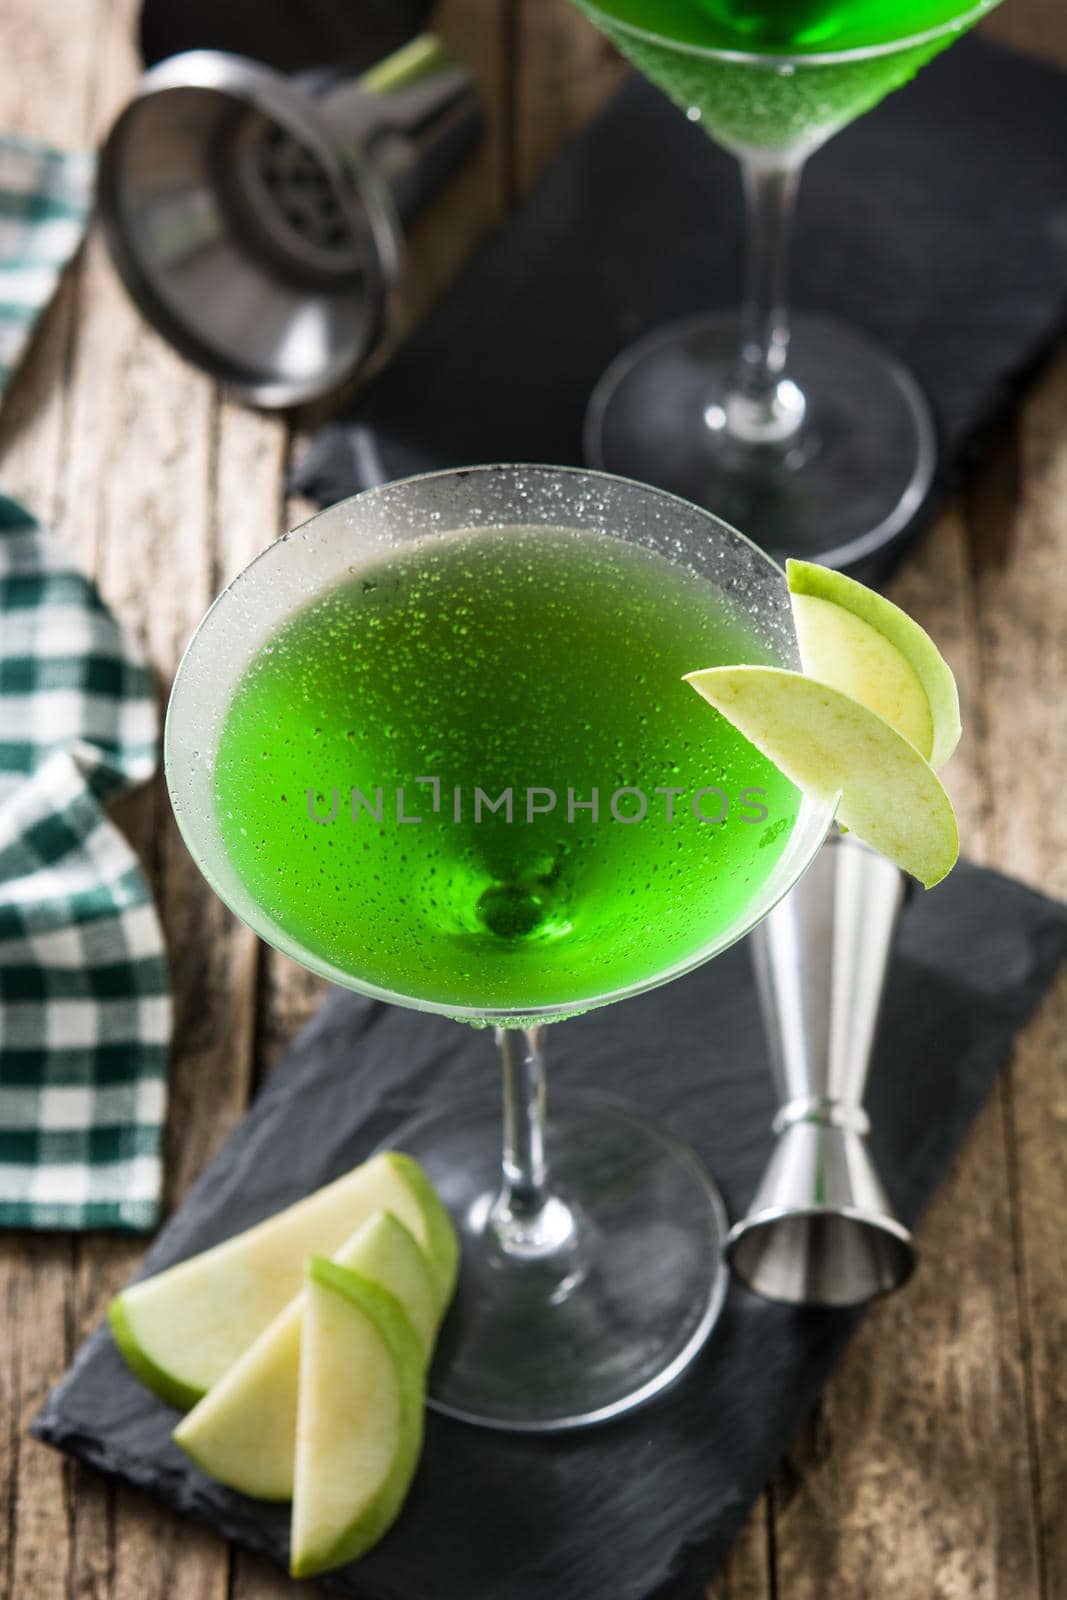 Green appletini cocktail on wooden table